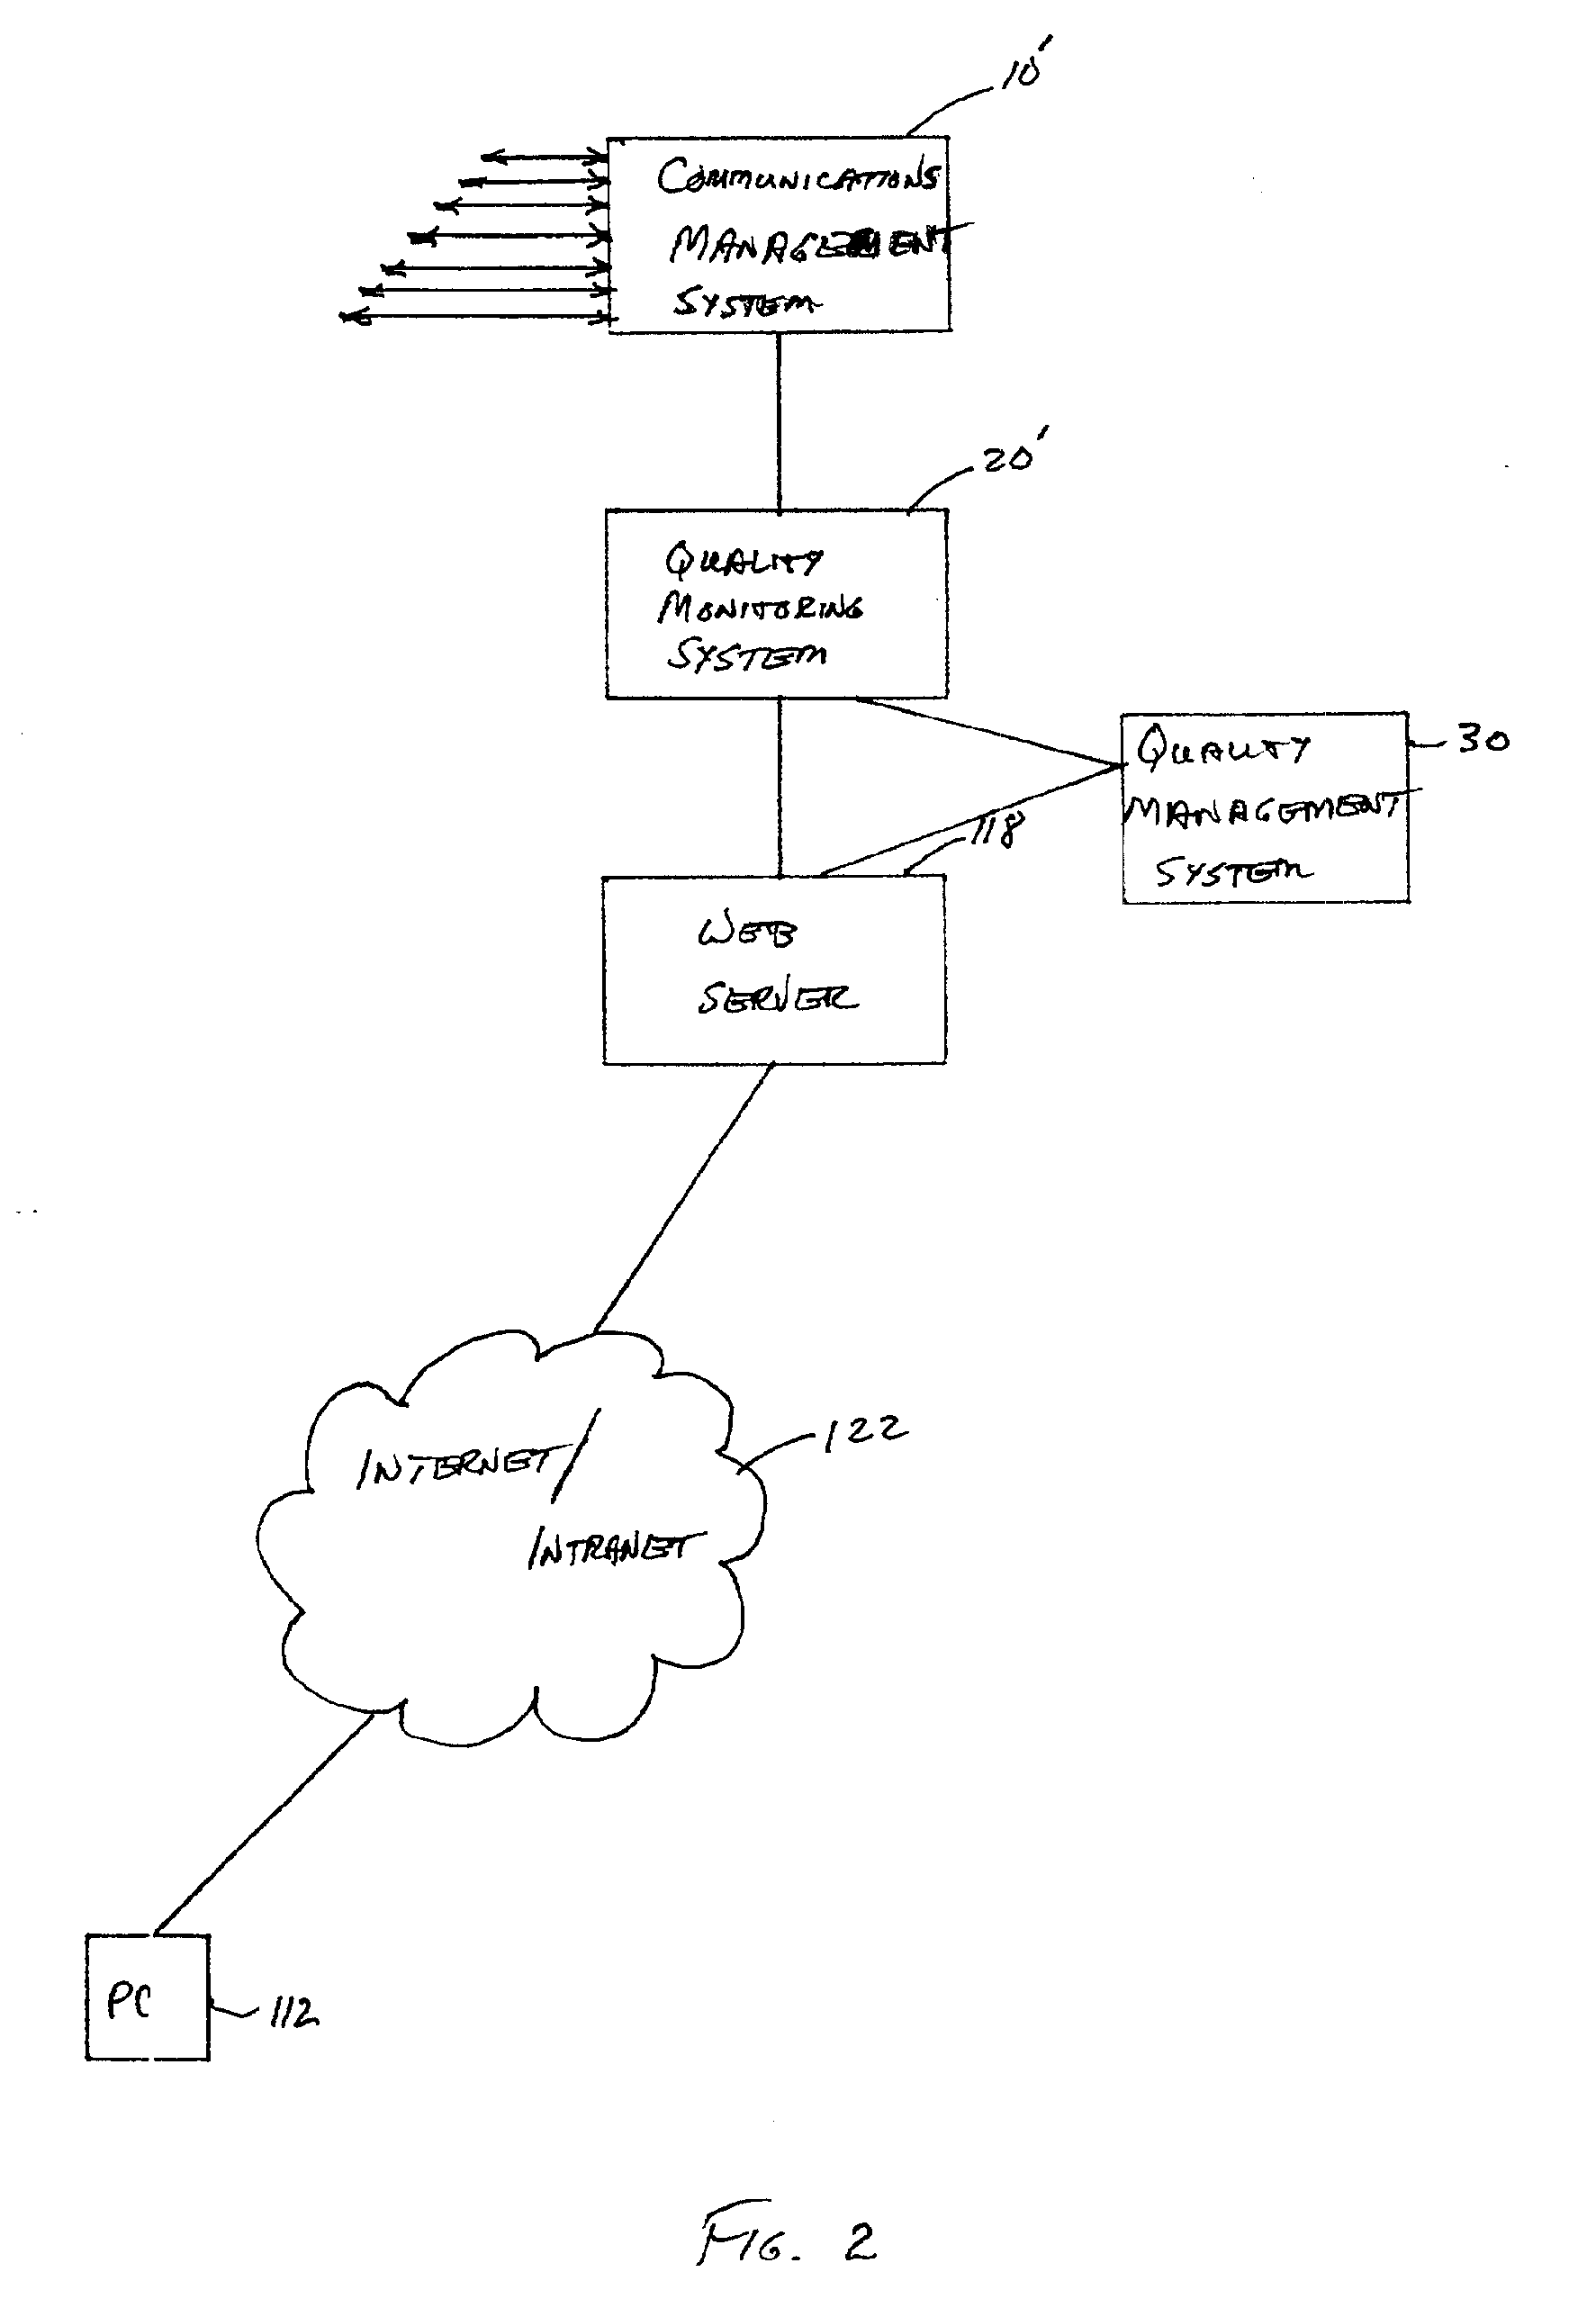 Apparatus and method for monitoring and adapting to environmental factors within a contact center